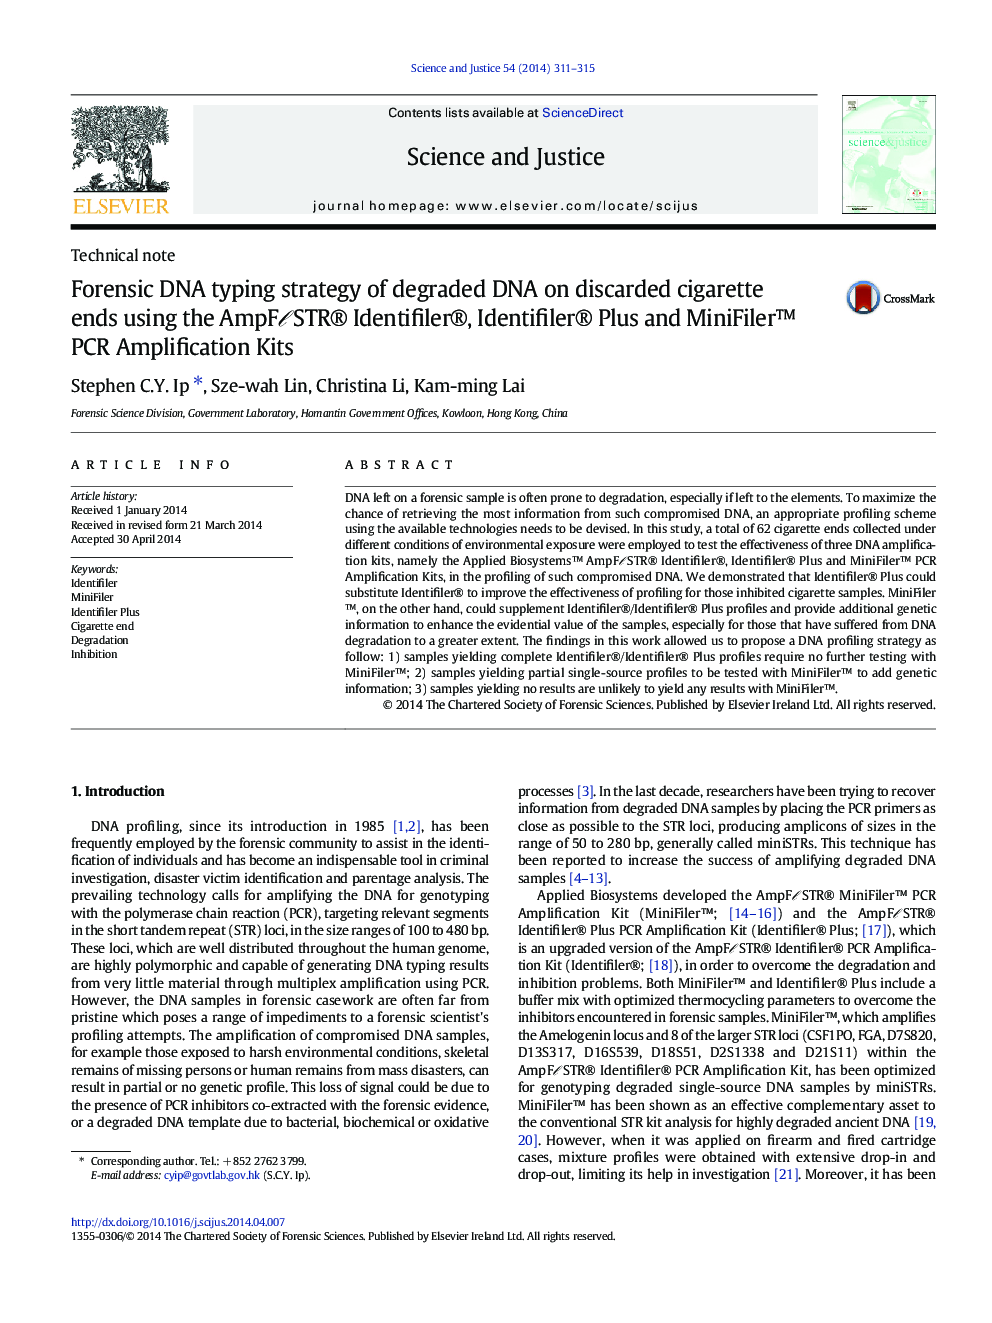 Forensic DNA typing strategy of degraded DNA on discarded cigarette ends using the AmpFâSTR® Identifiler®, Identifiler® Plus and MiniFilerâ¢ PCR Amplification Kits